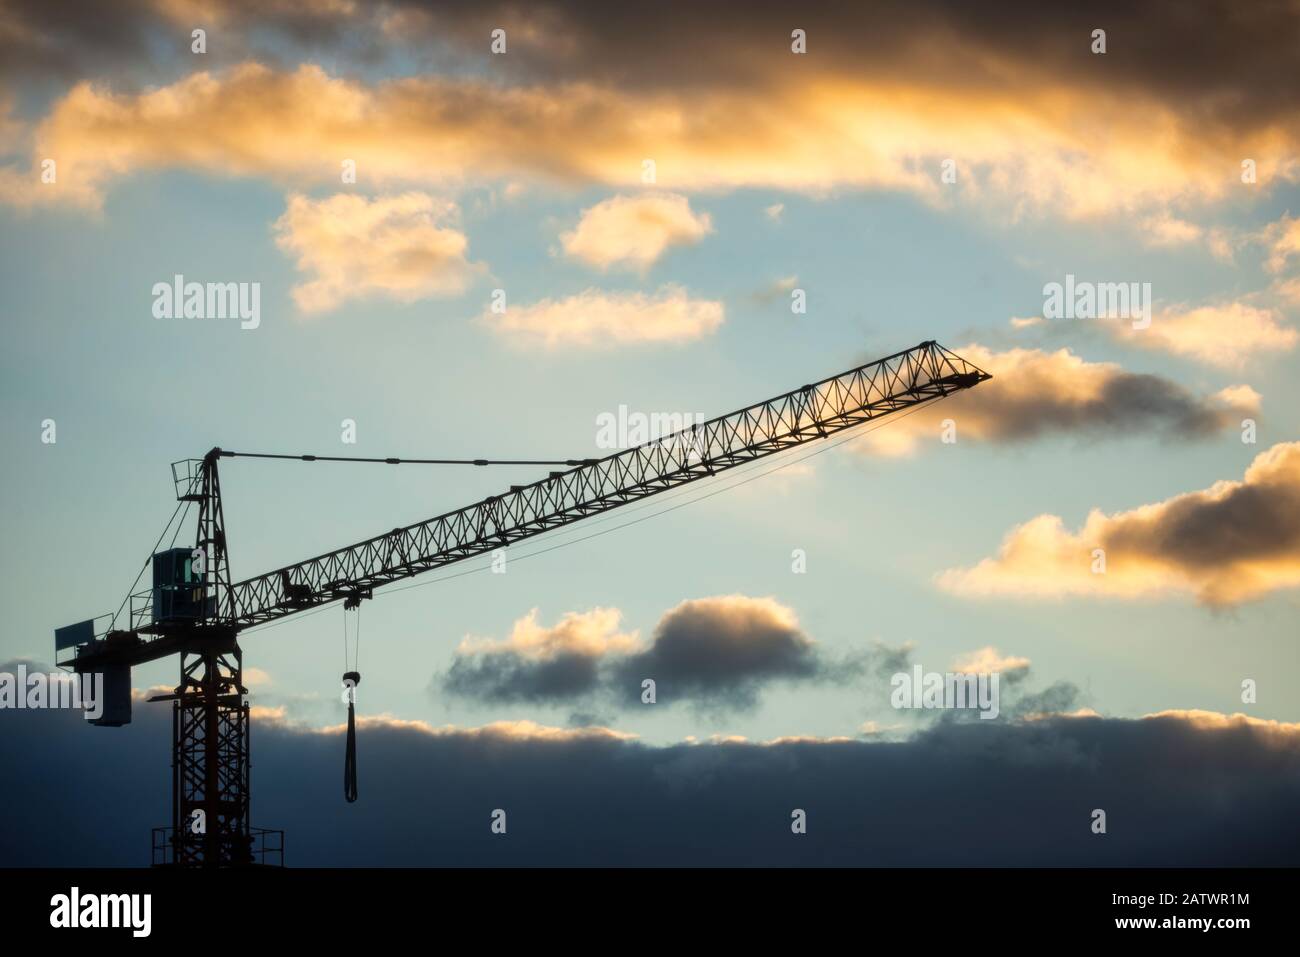 construction crane silhouette in a building under construction with a cloudy sky background at dawn Stock Photo